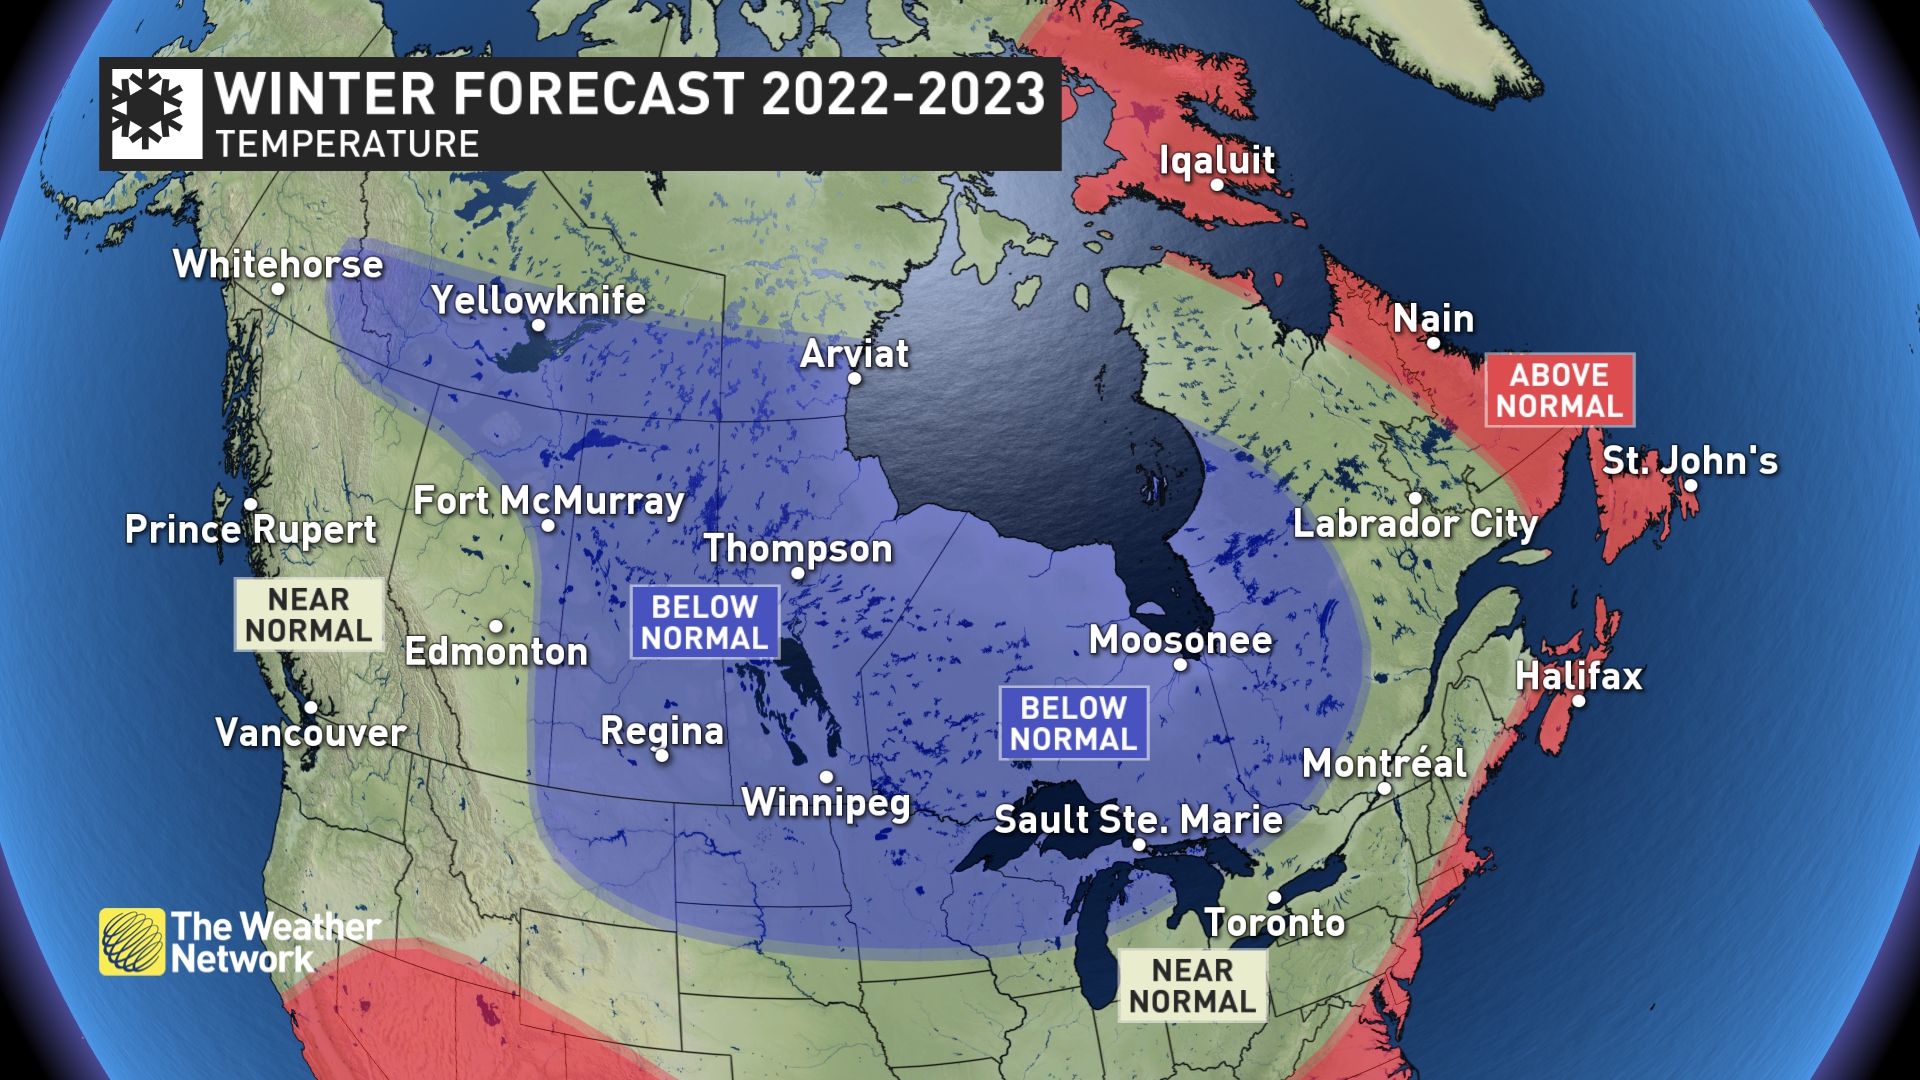 Winter Forecast 2022-23 - National Temperature outlook